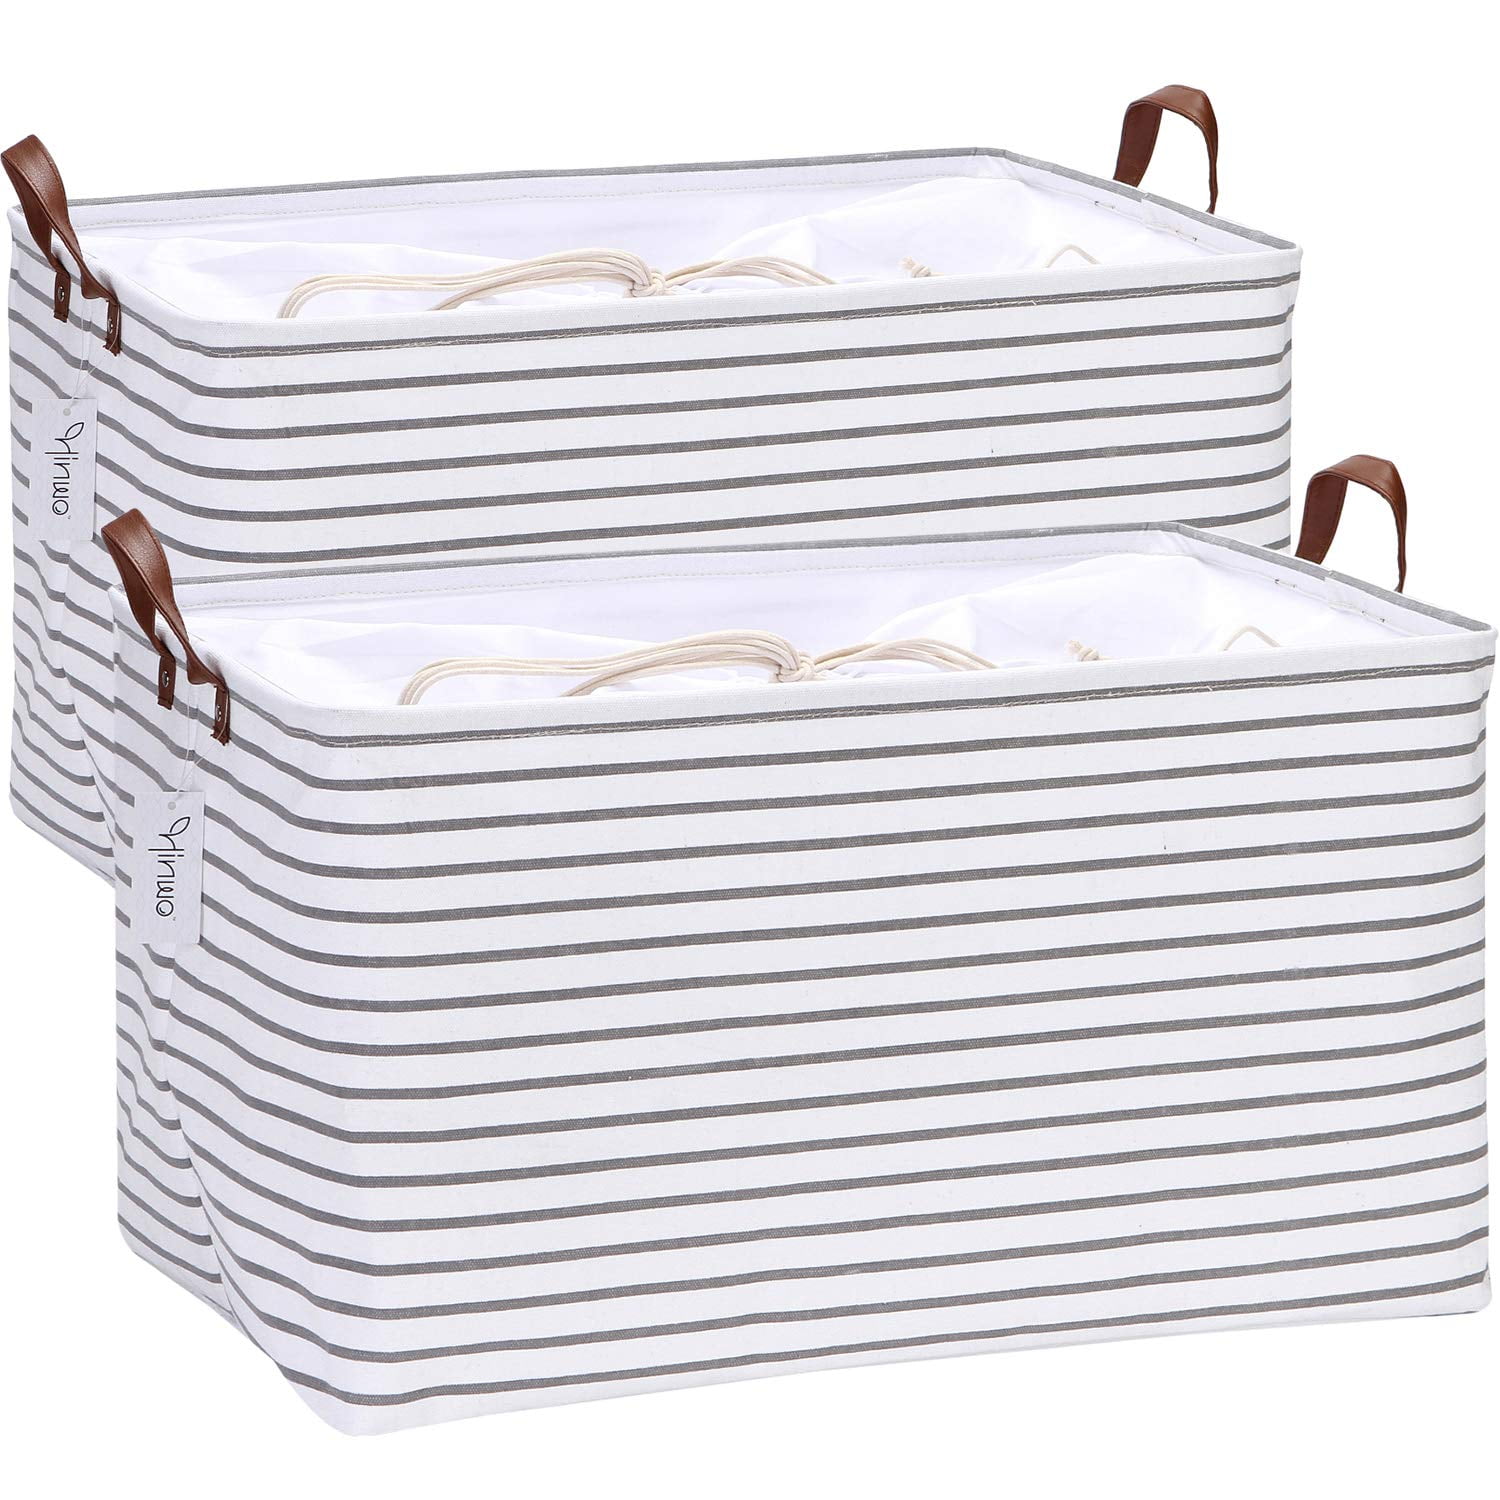 The Container Store Large Nordic Basket - White - 11 x 14-1/2 x 8 - Each